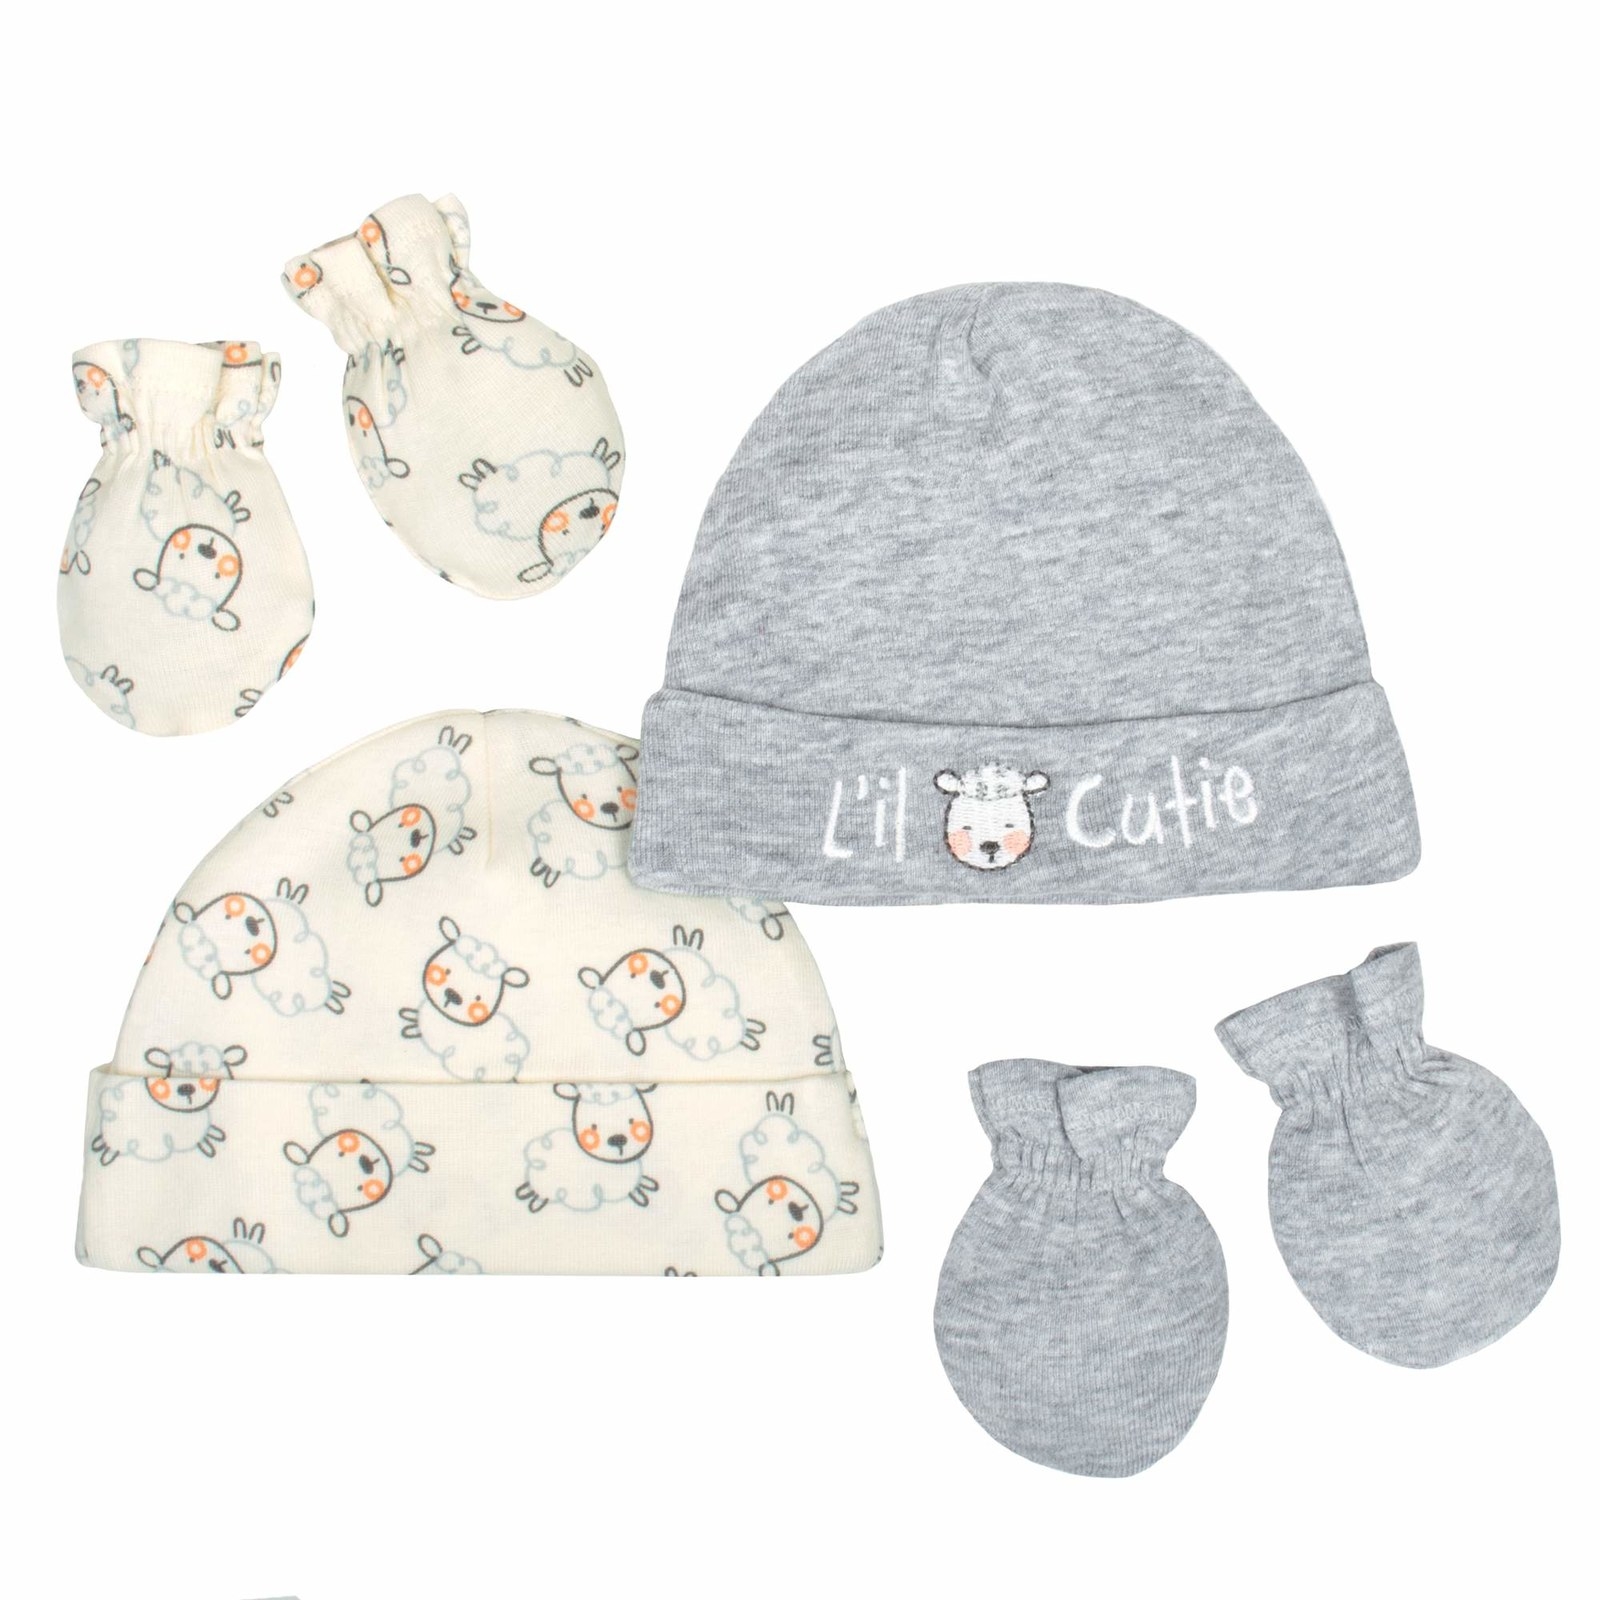 21 Adorable Gender-Neutral Baby Gifts